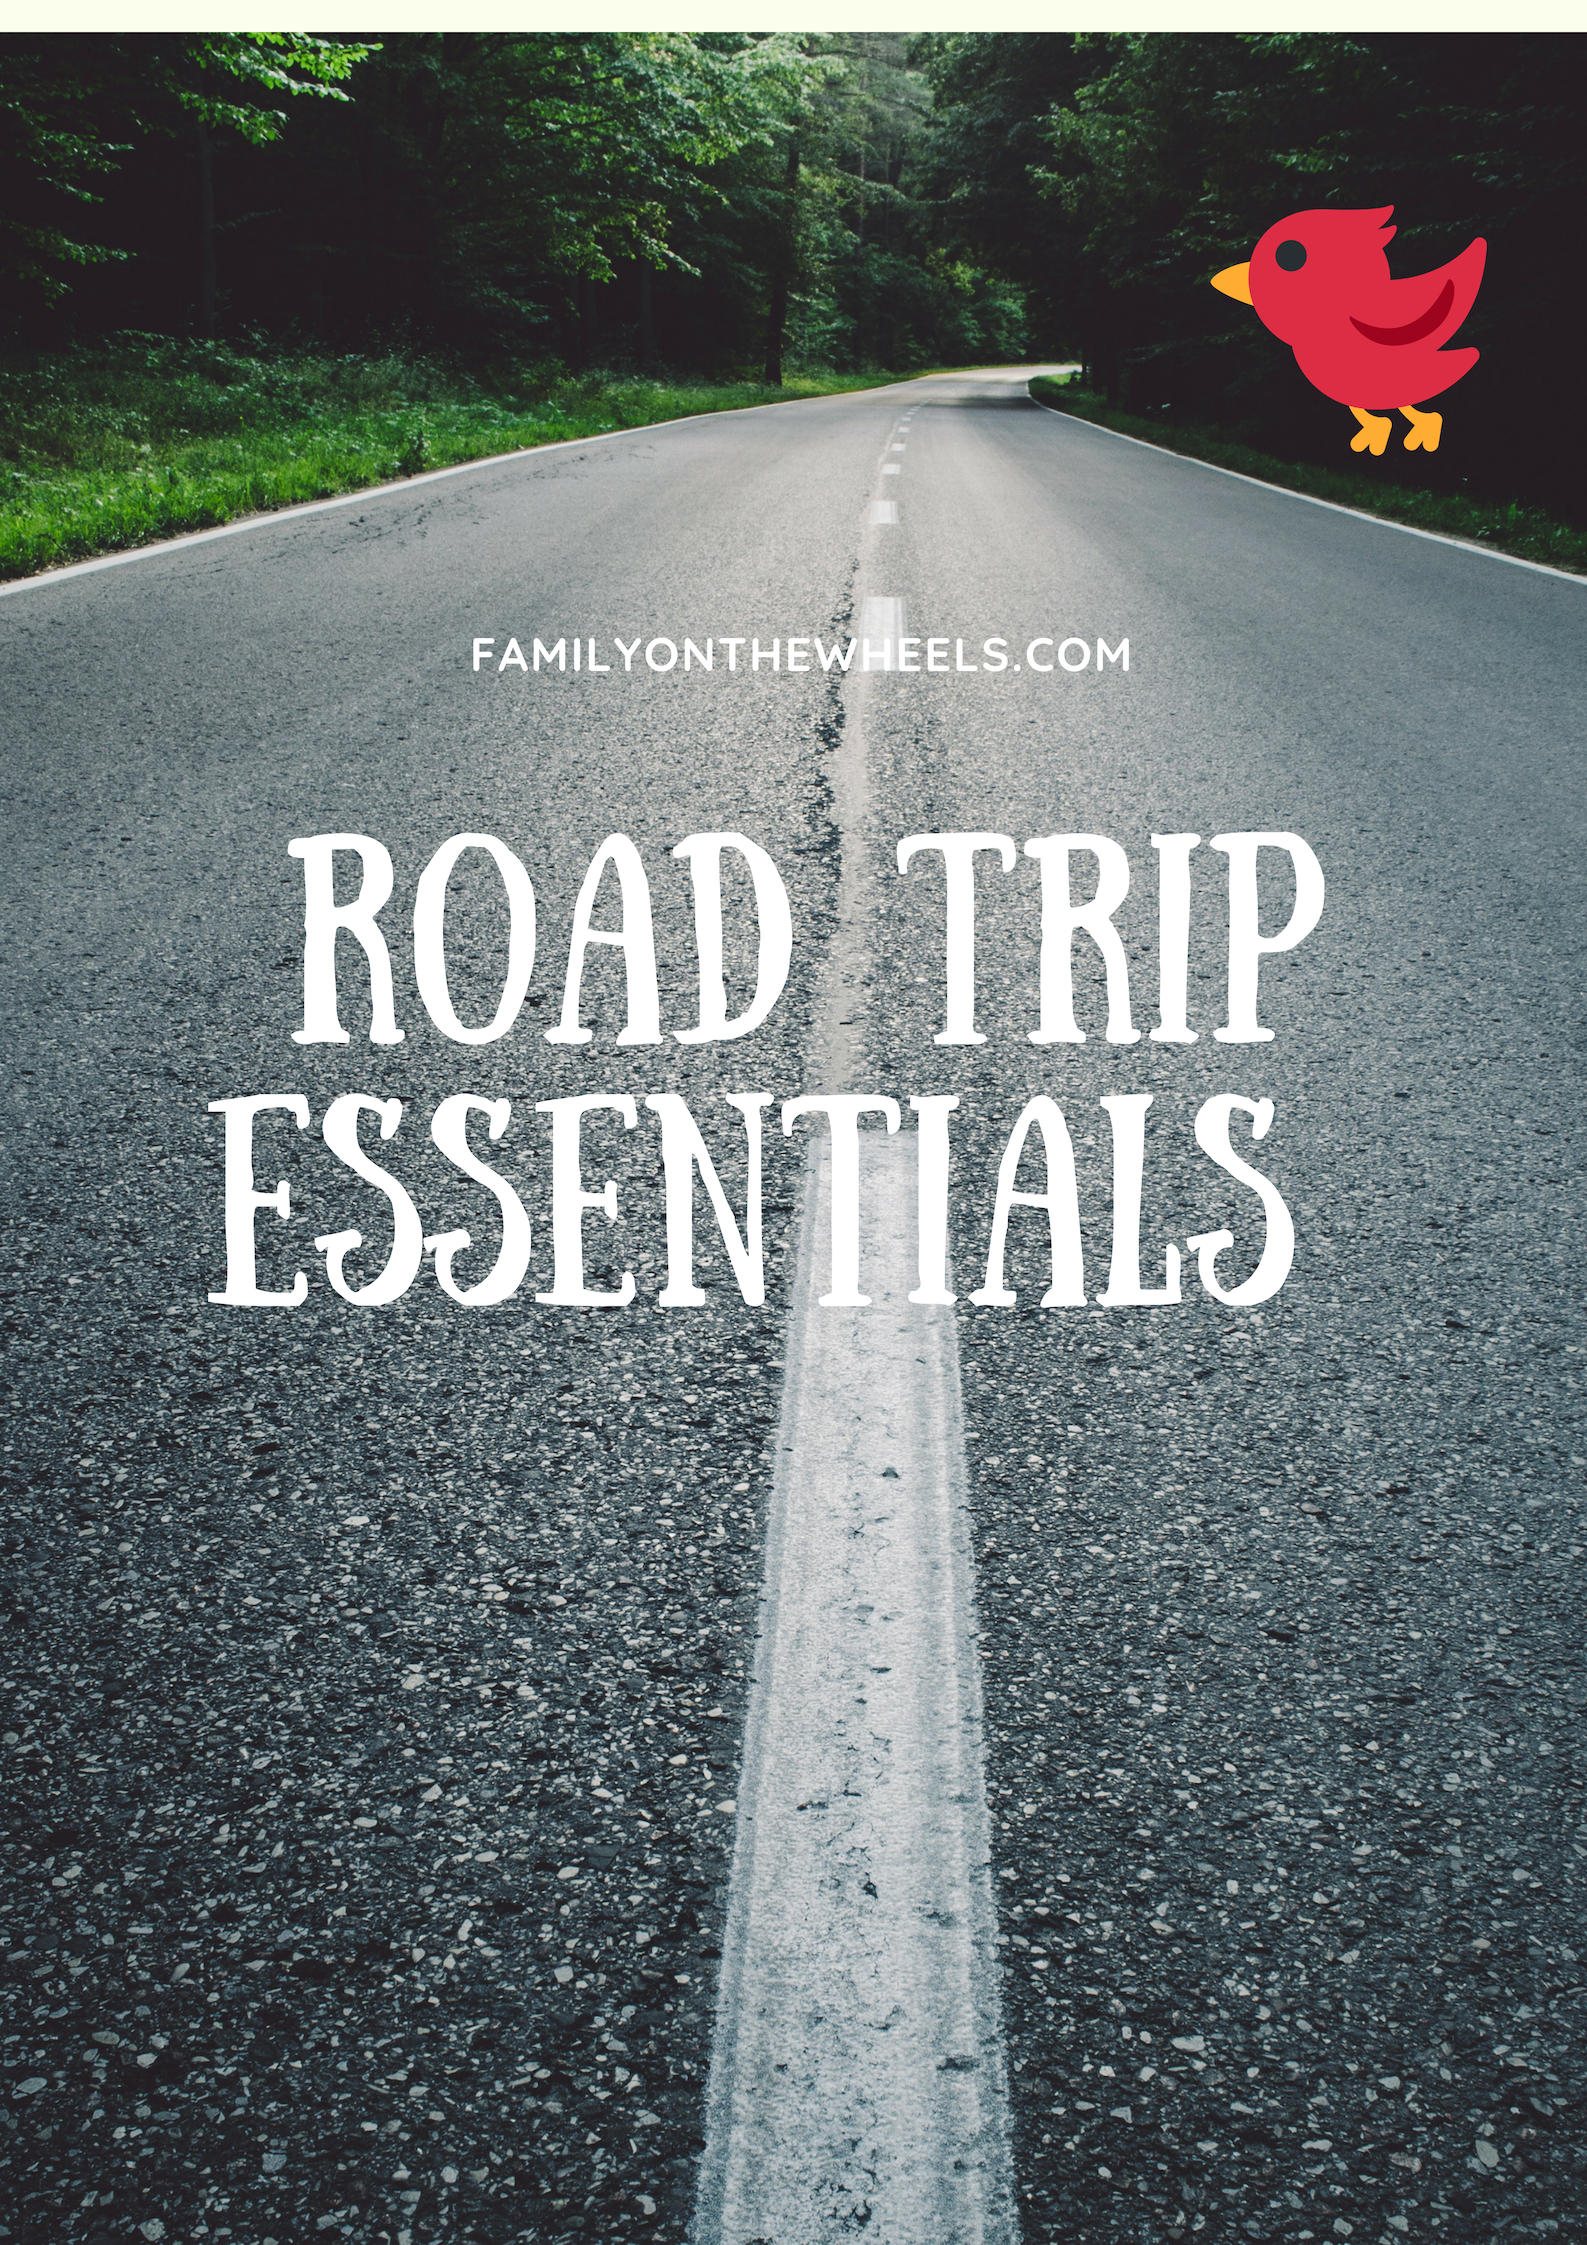 Road Trip essentials for us, we are travel addicts and road trips are what we love. Be it by car or bikes, world has always greeted us with open arms. Come check out why we love our Roadtrip travel essentials. #travelessentials #roadtrip #essentials #dashcam #travelgram